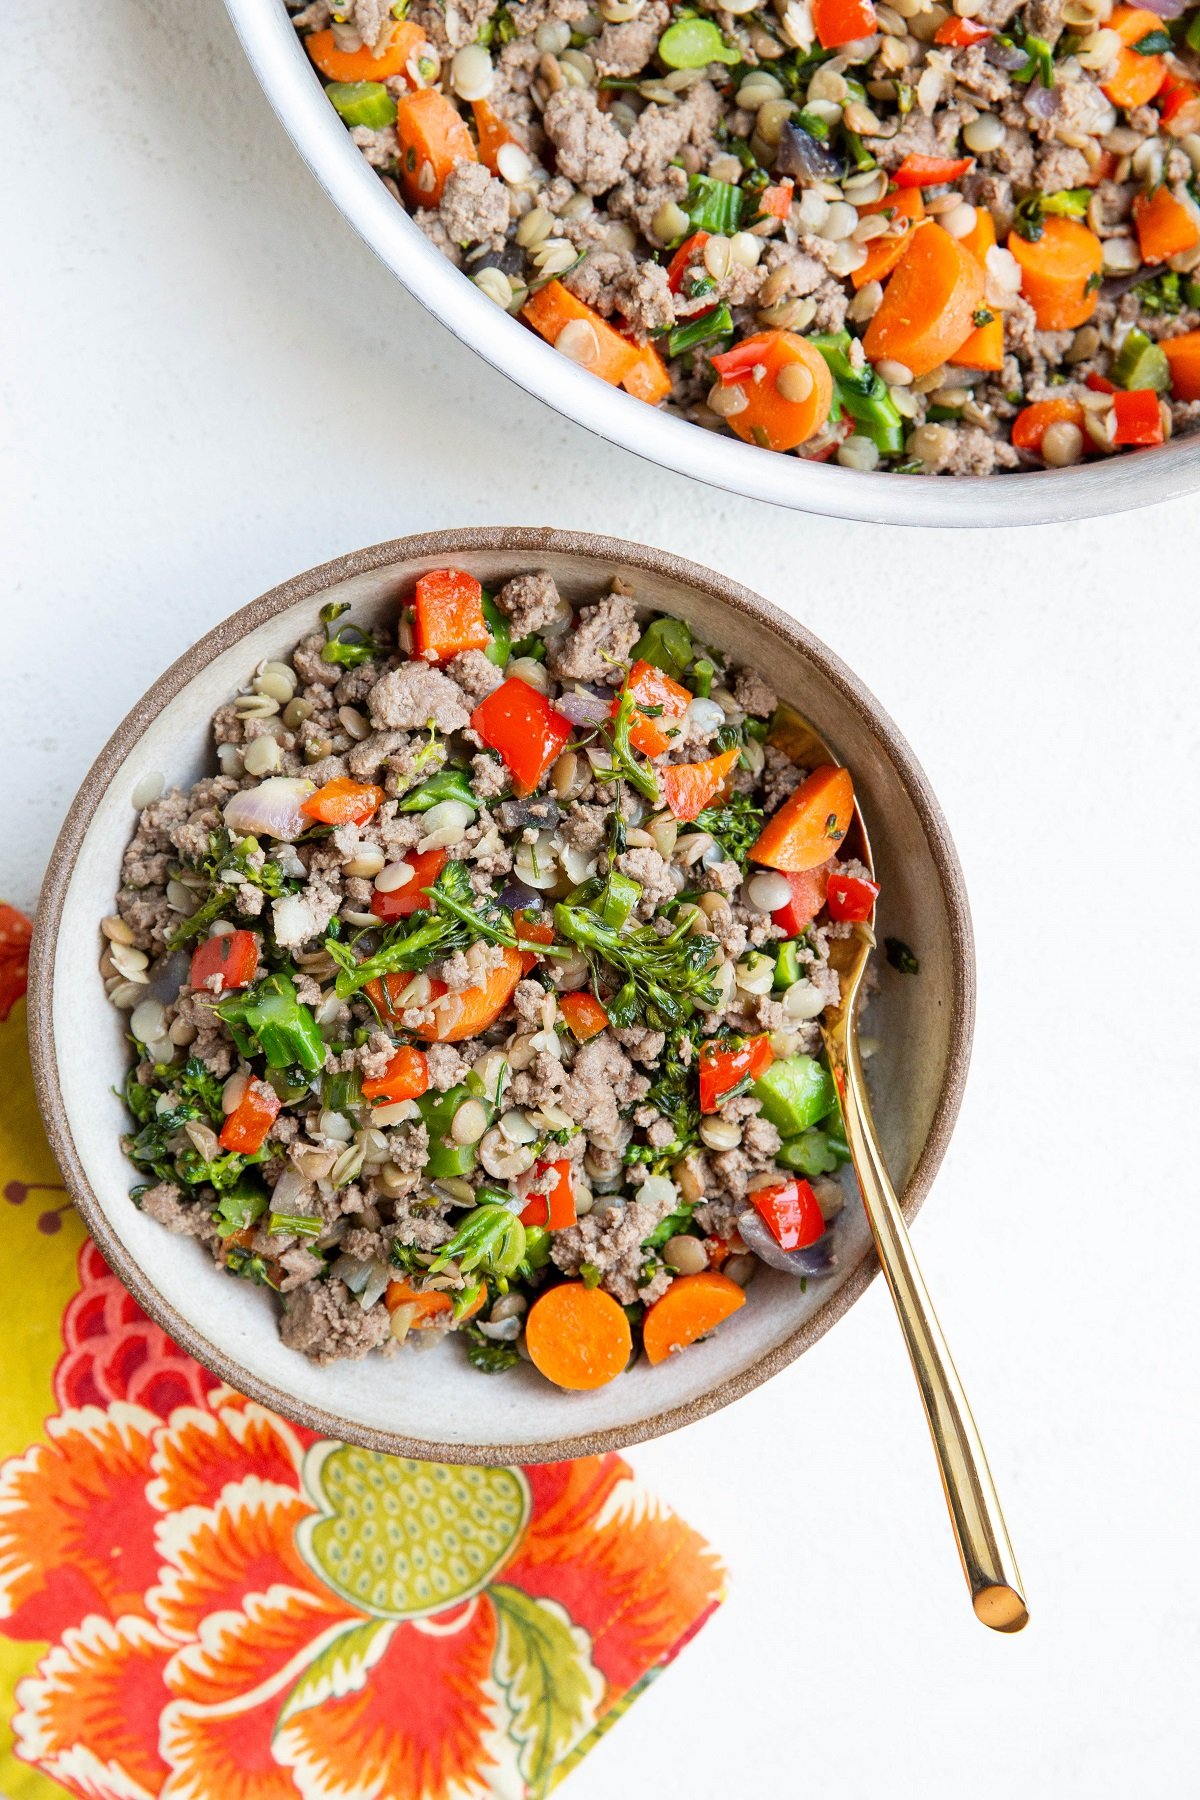 Bowl and skillet full of ground beef, lentils, and veggies.